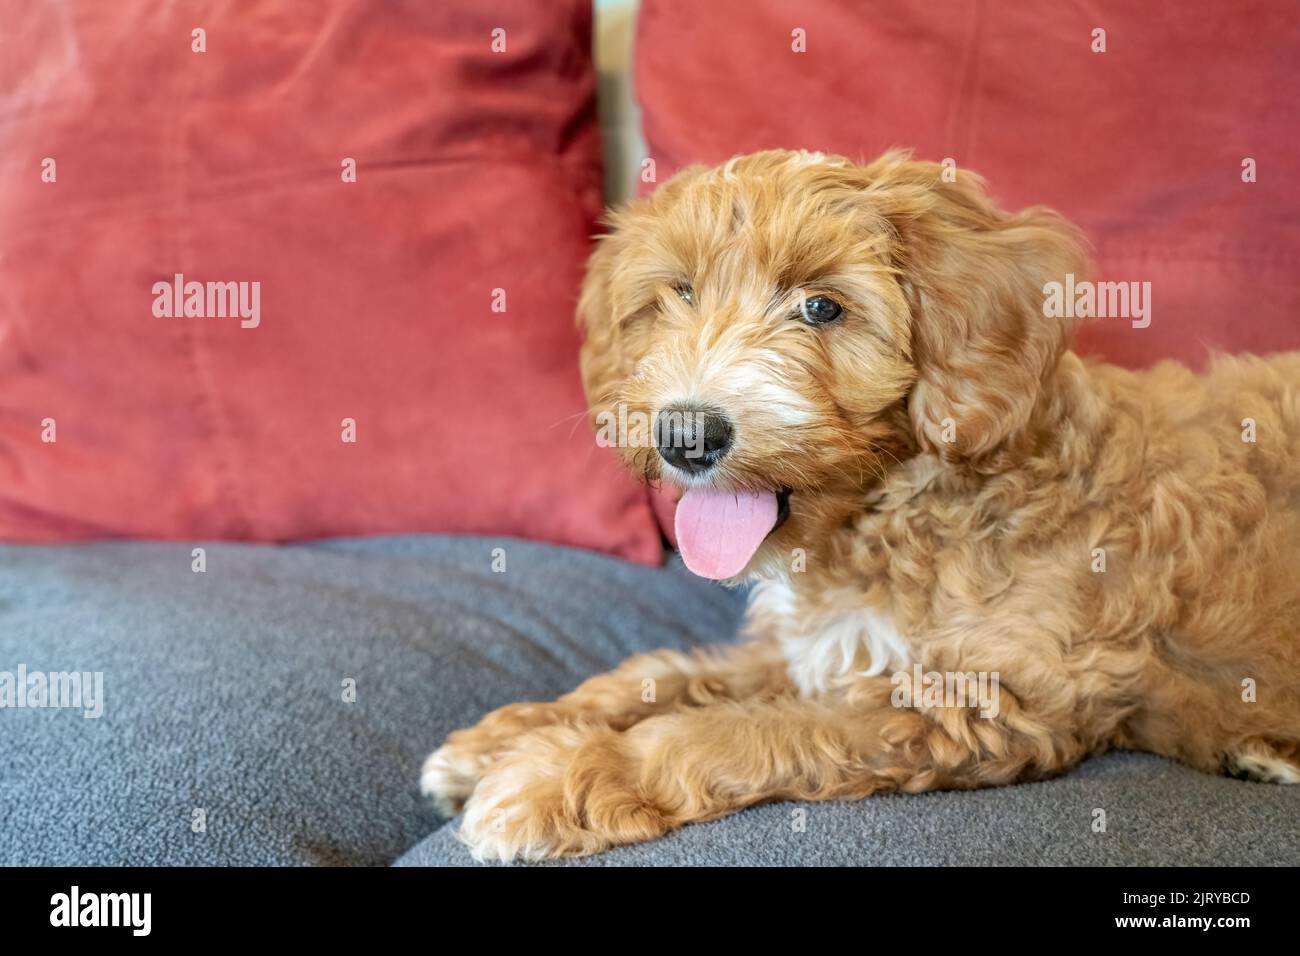 Issaquah, Washington, USA.  3-month old Aussiedoodle puppy named 'Bella' reclining on a sofa.  (PR) Stock Photo